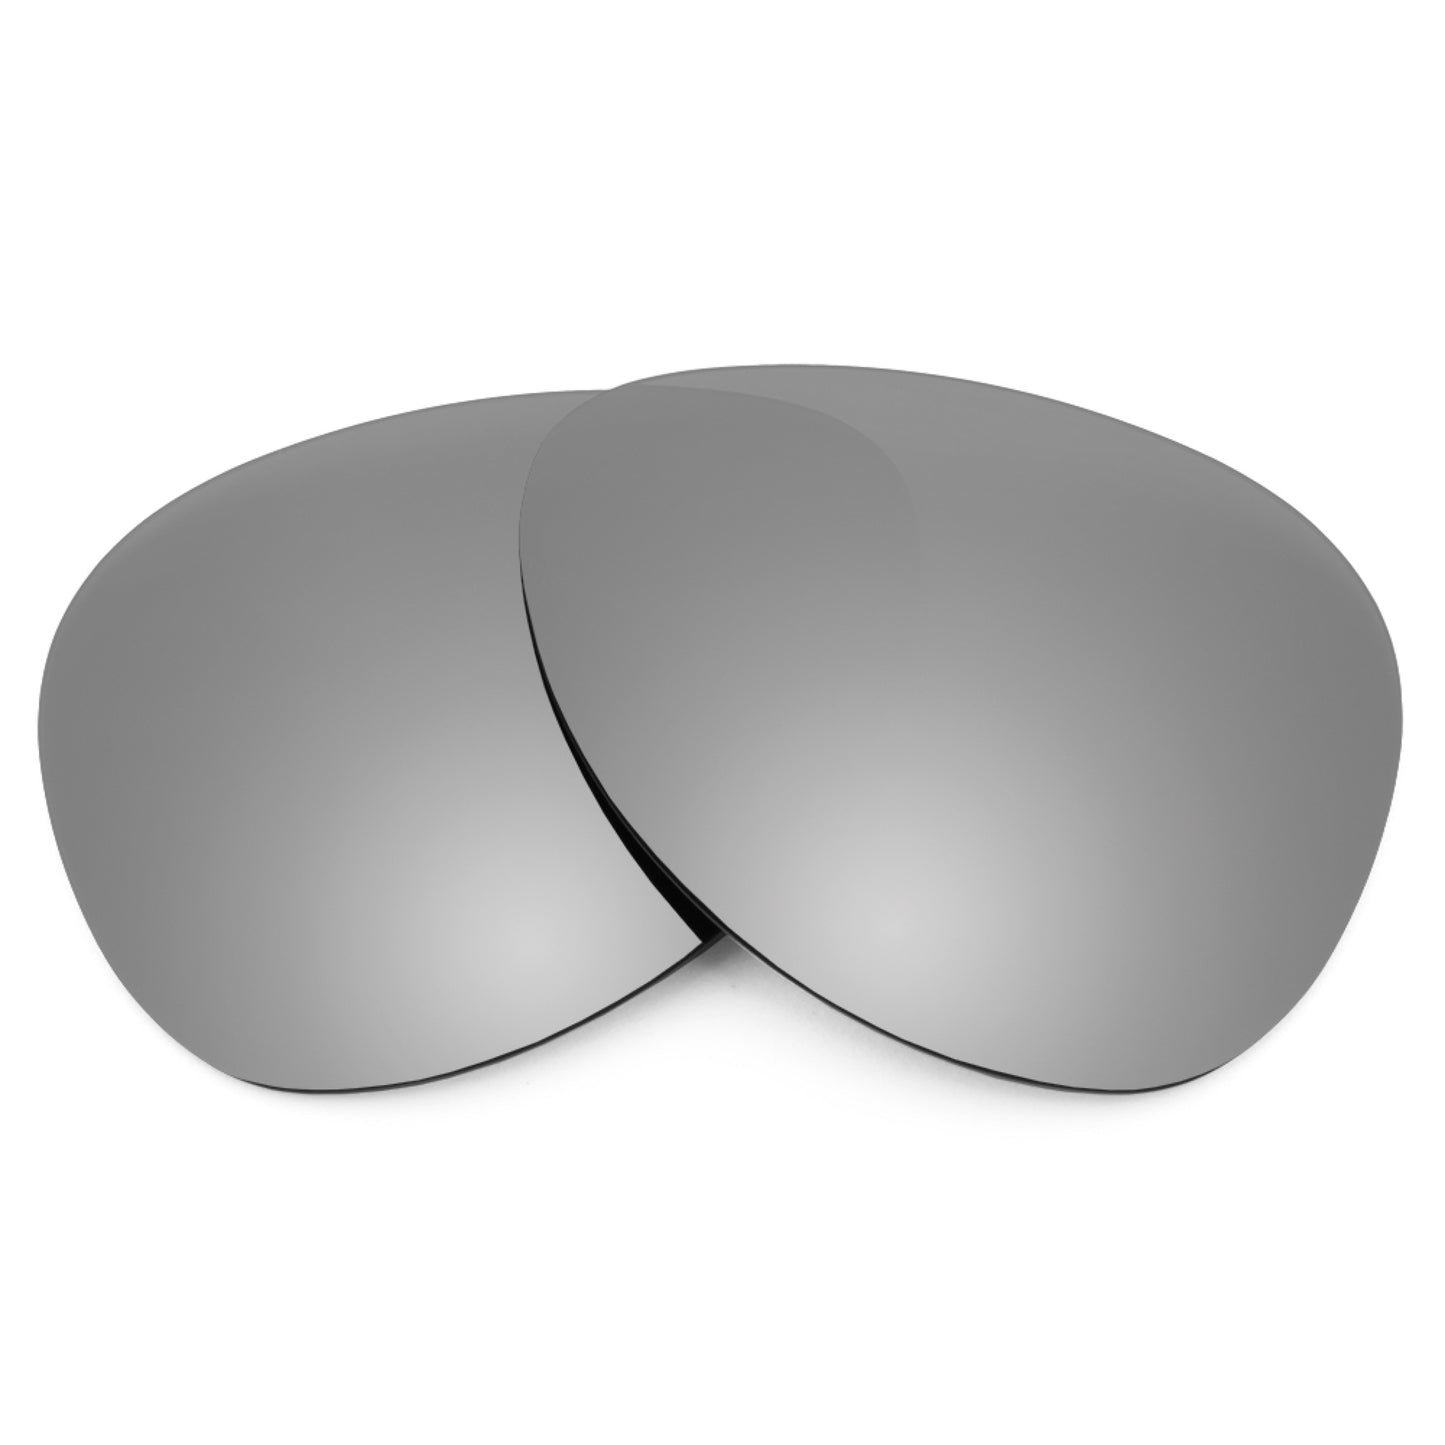 Revant replacement lenses for Ray-Ban Cats 1000 RB4126 57mm Non-Polarized Titanium